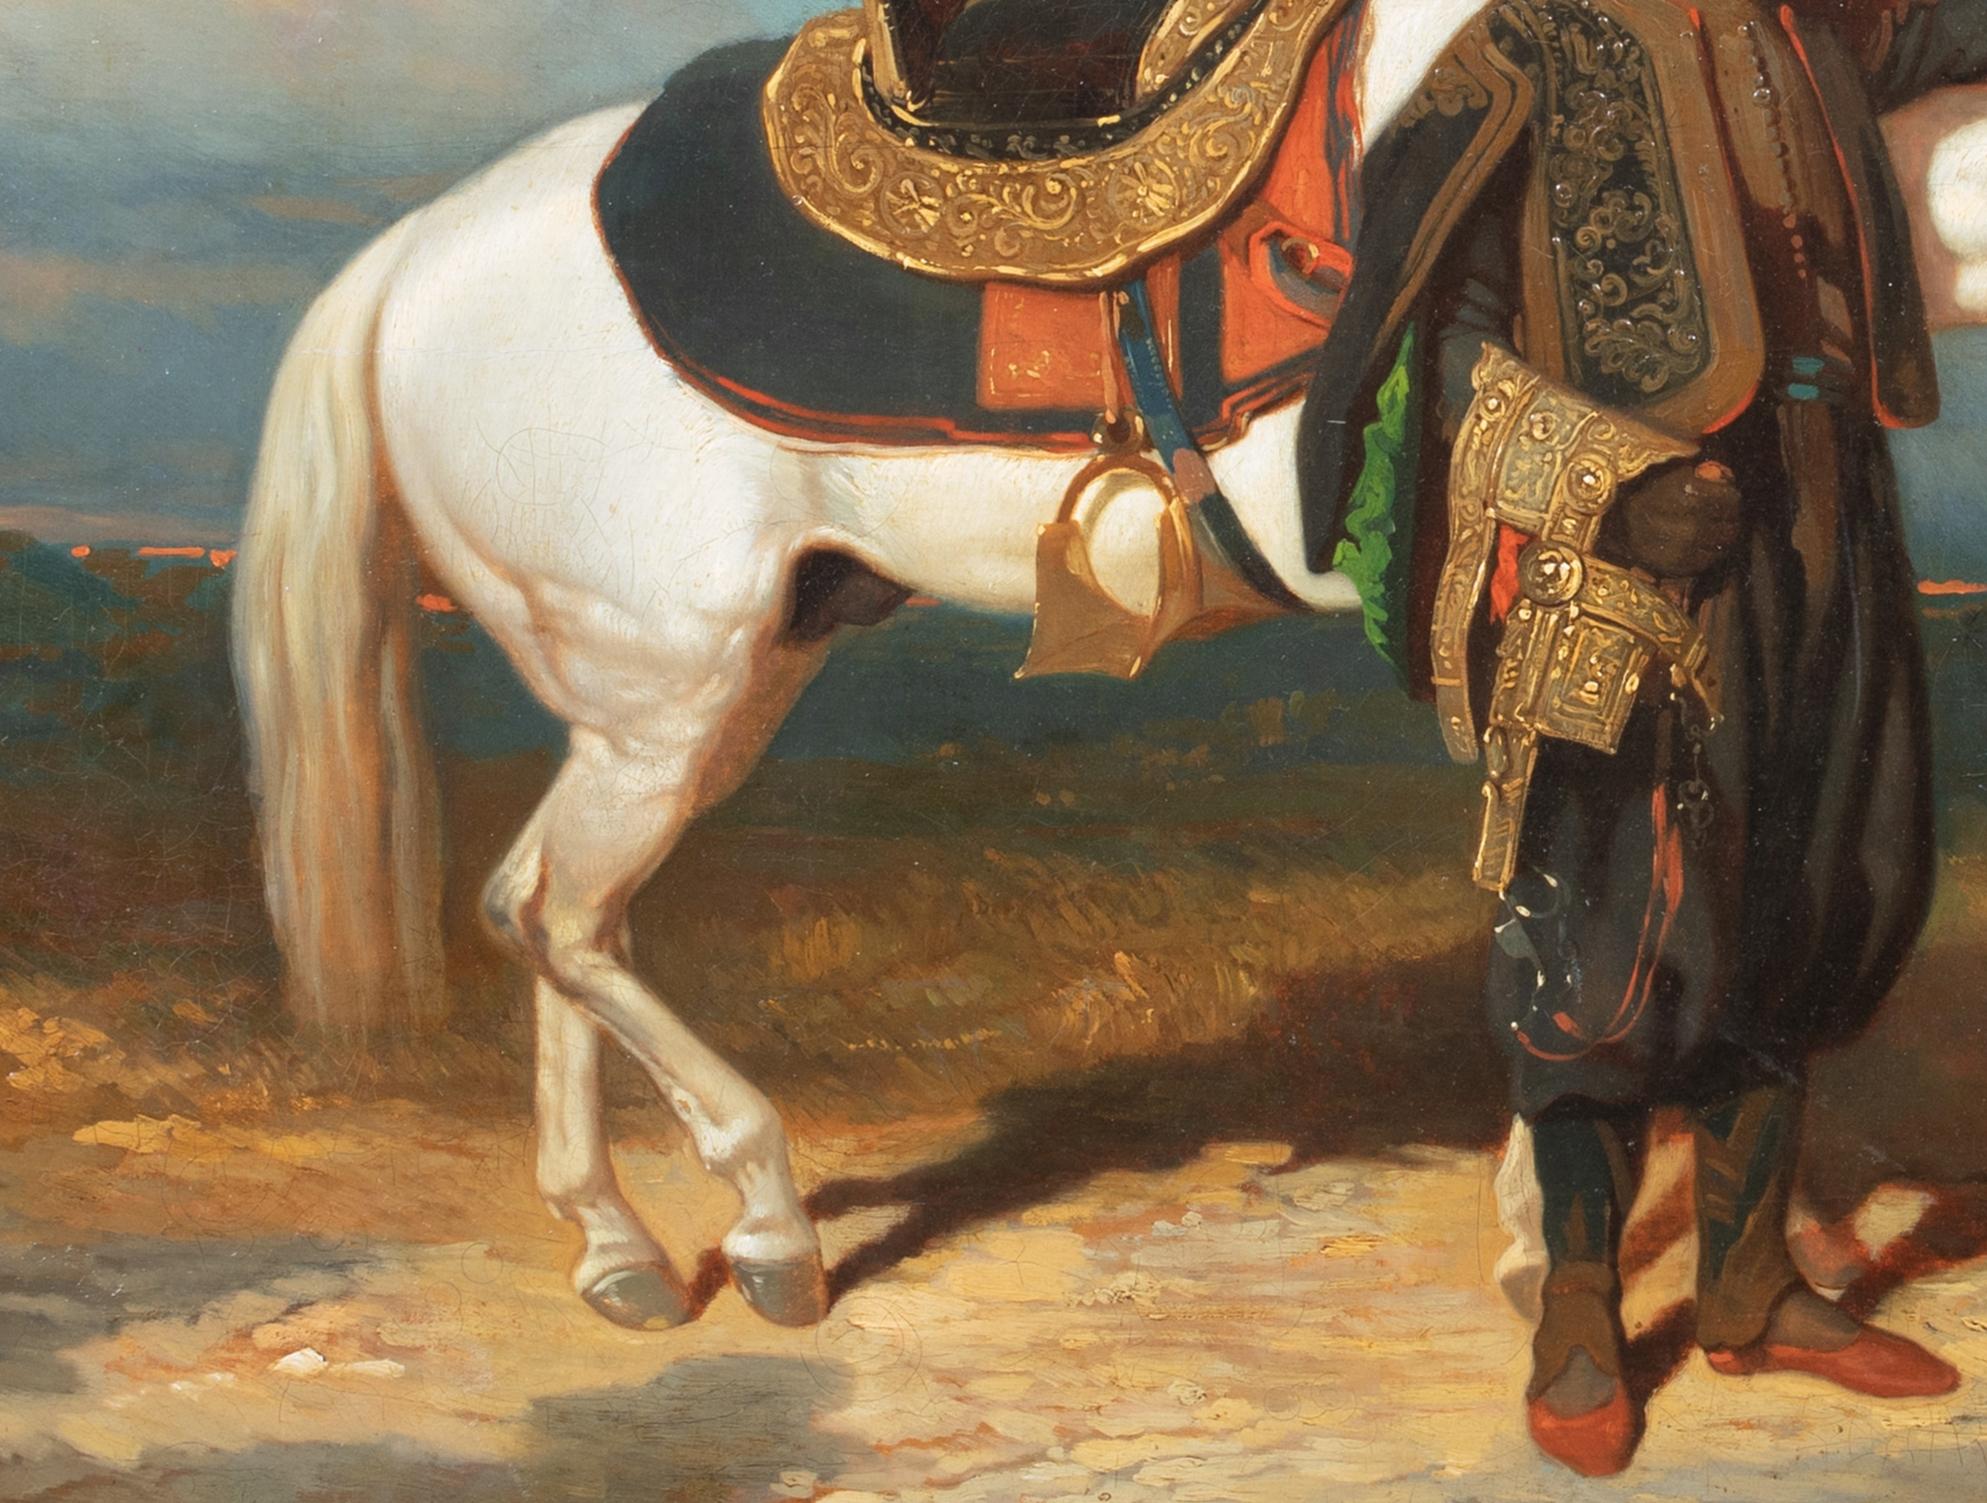 White Arabian Horse & Man, 19th Century

circle of Alfred de Dreux (1810-1860)

Large 19th Century French Orientalist portrait of a White Arabian Horse and rider, oil on canvas. Excellent quality and condition circa 1850 large scale study of the